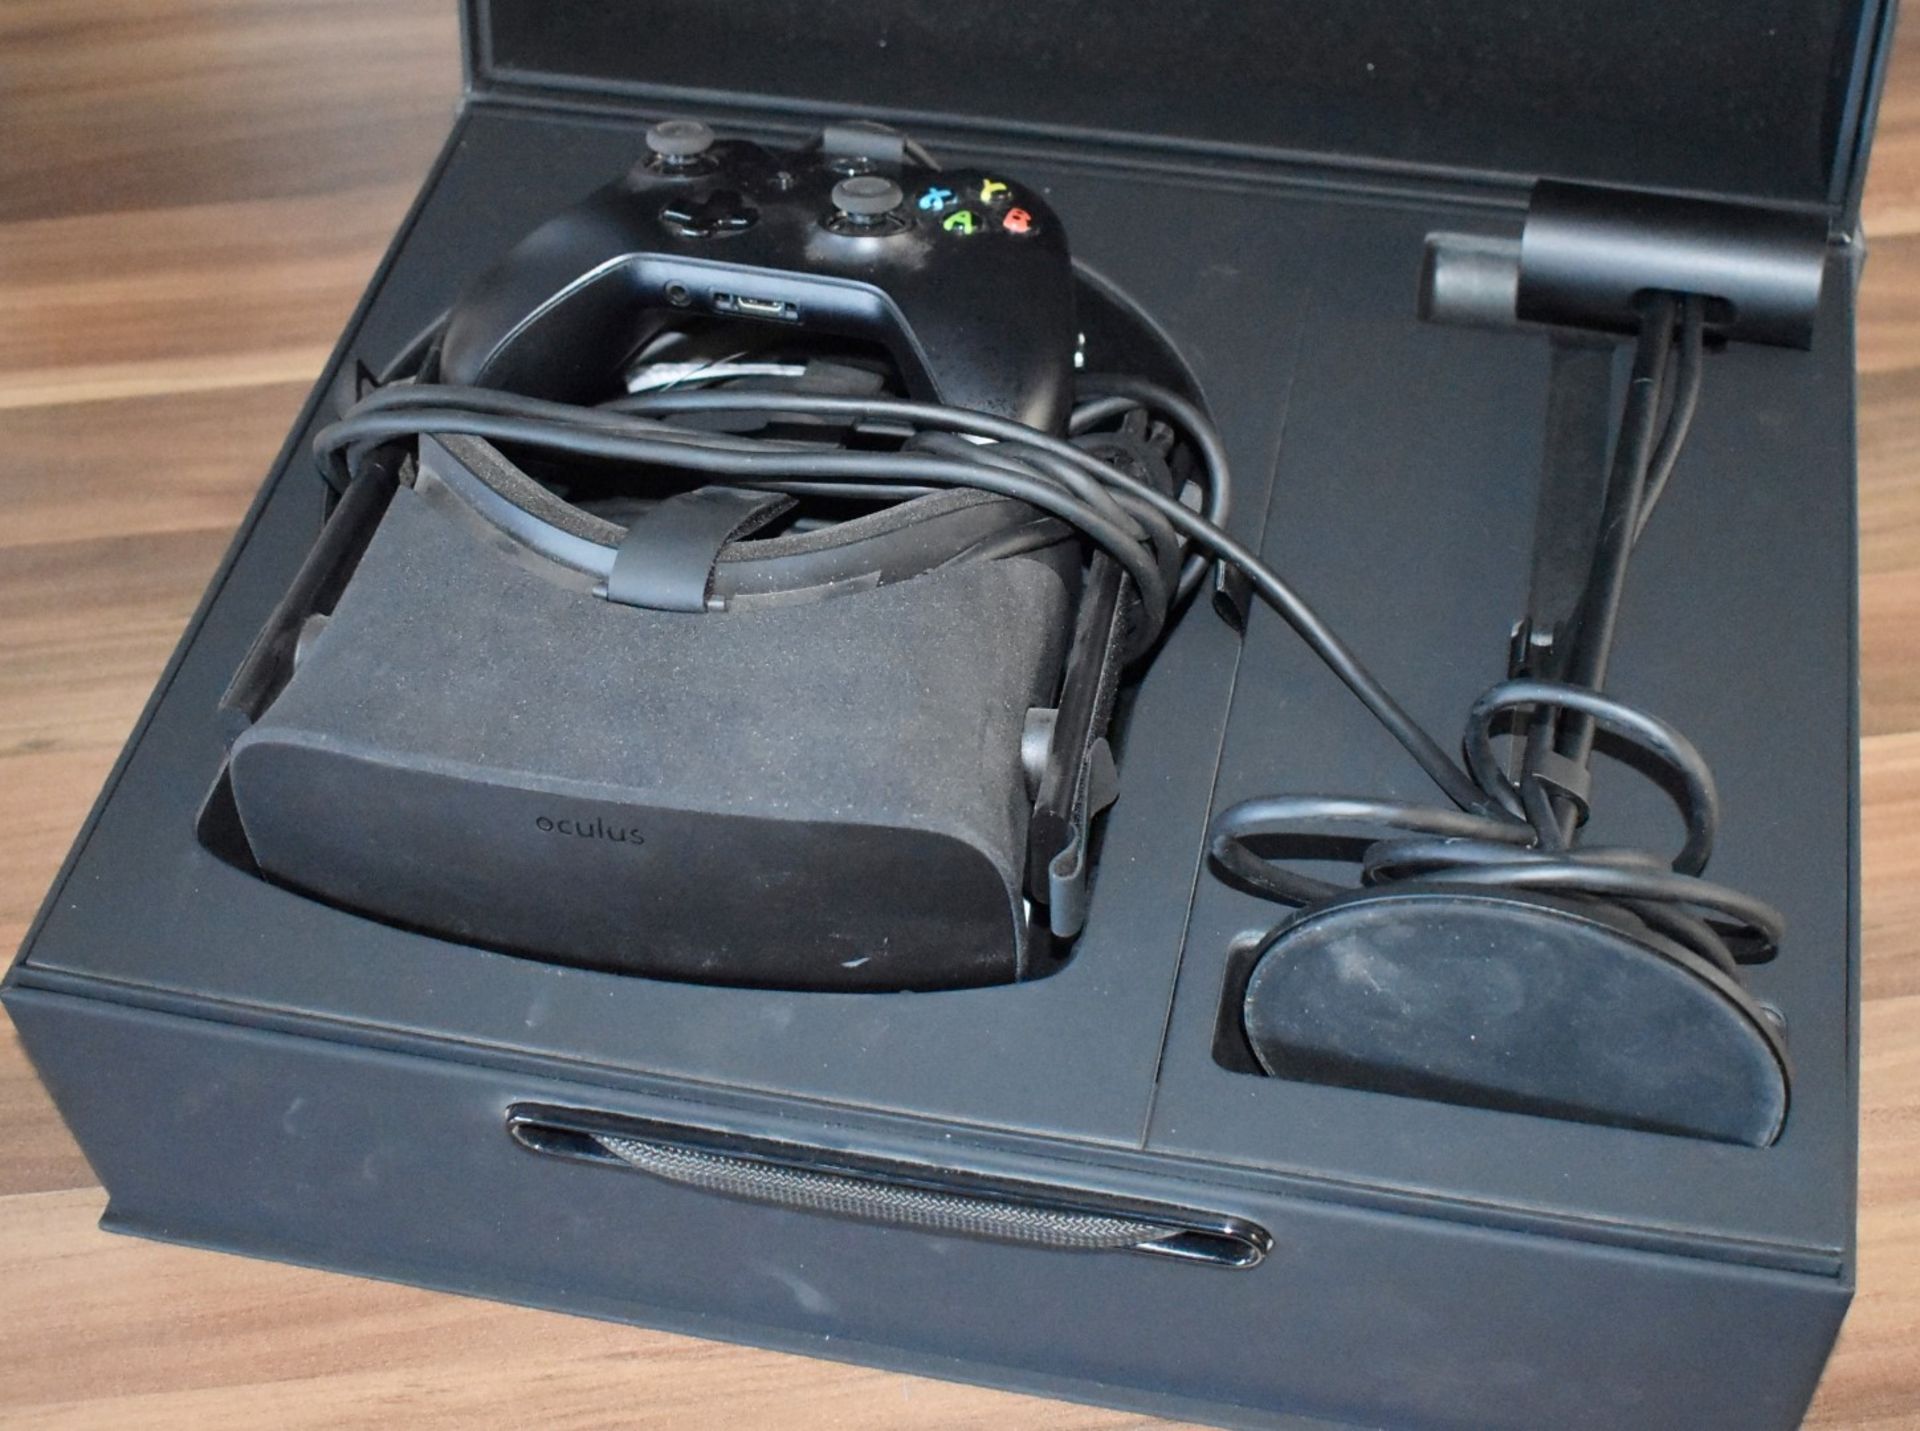 1 x Oculus Rift Virtual Reality Headset - Comes With Original Box, Xbox Controller and Accessories